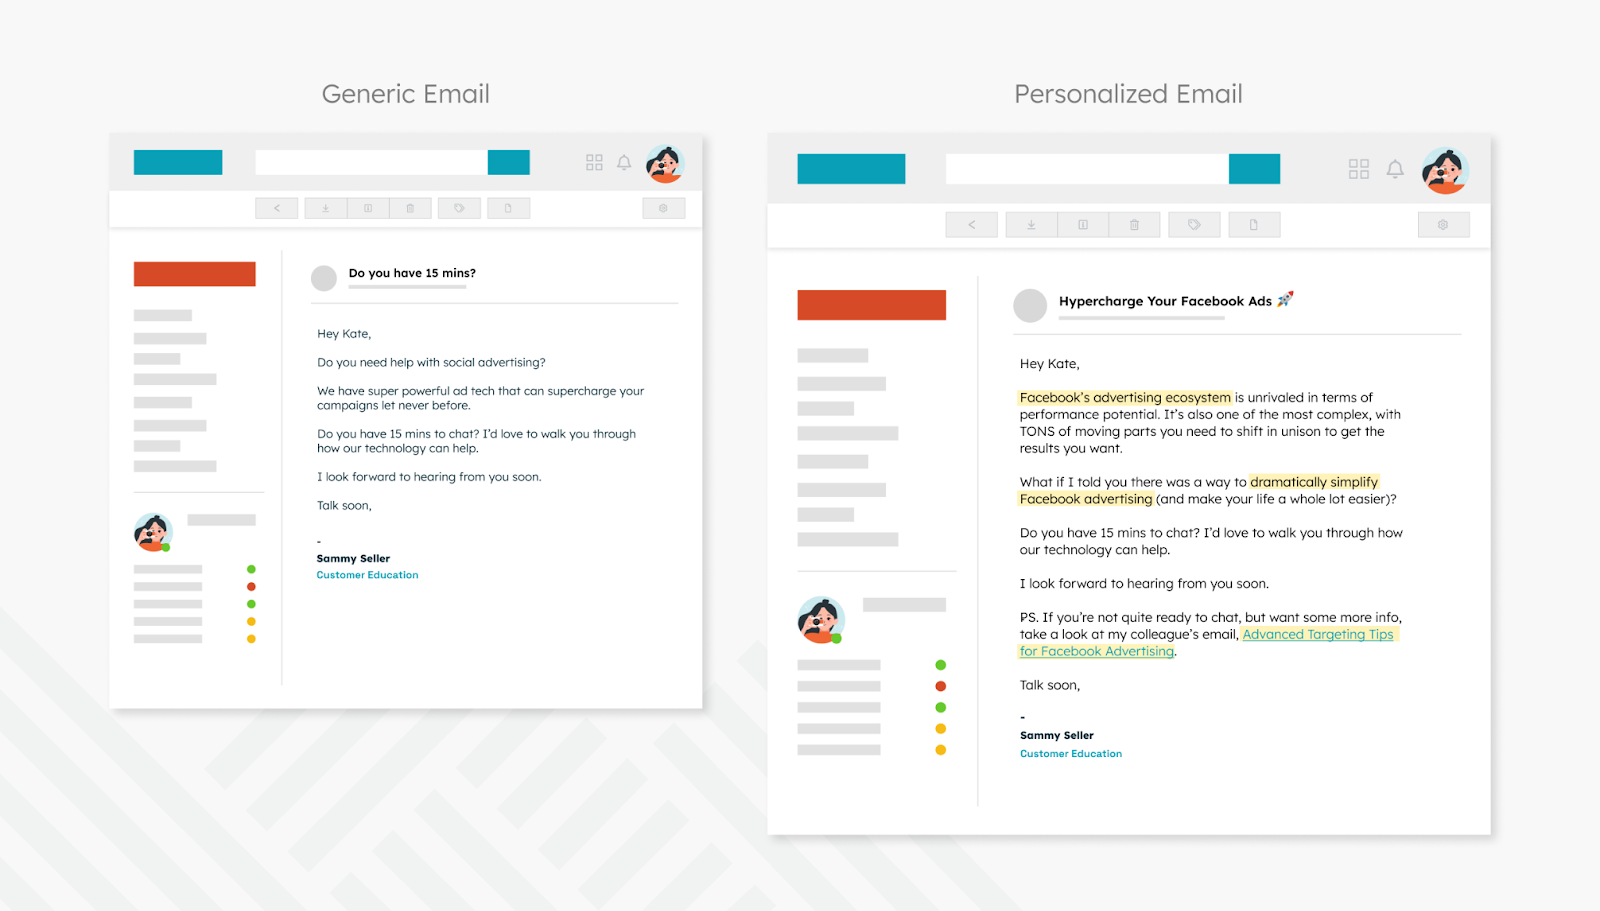 Personalized email comparison